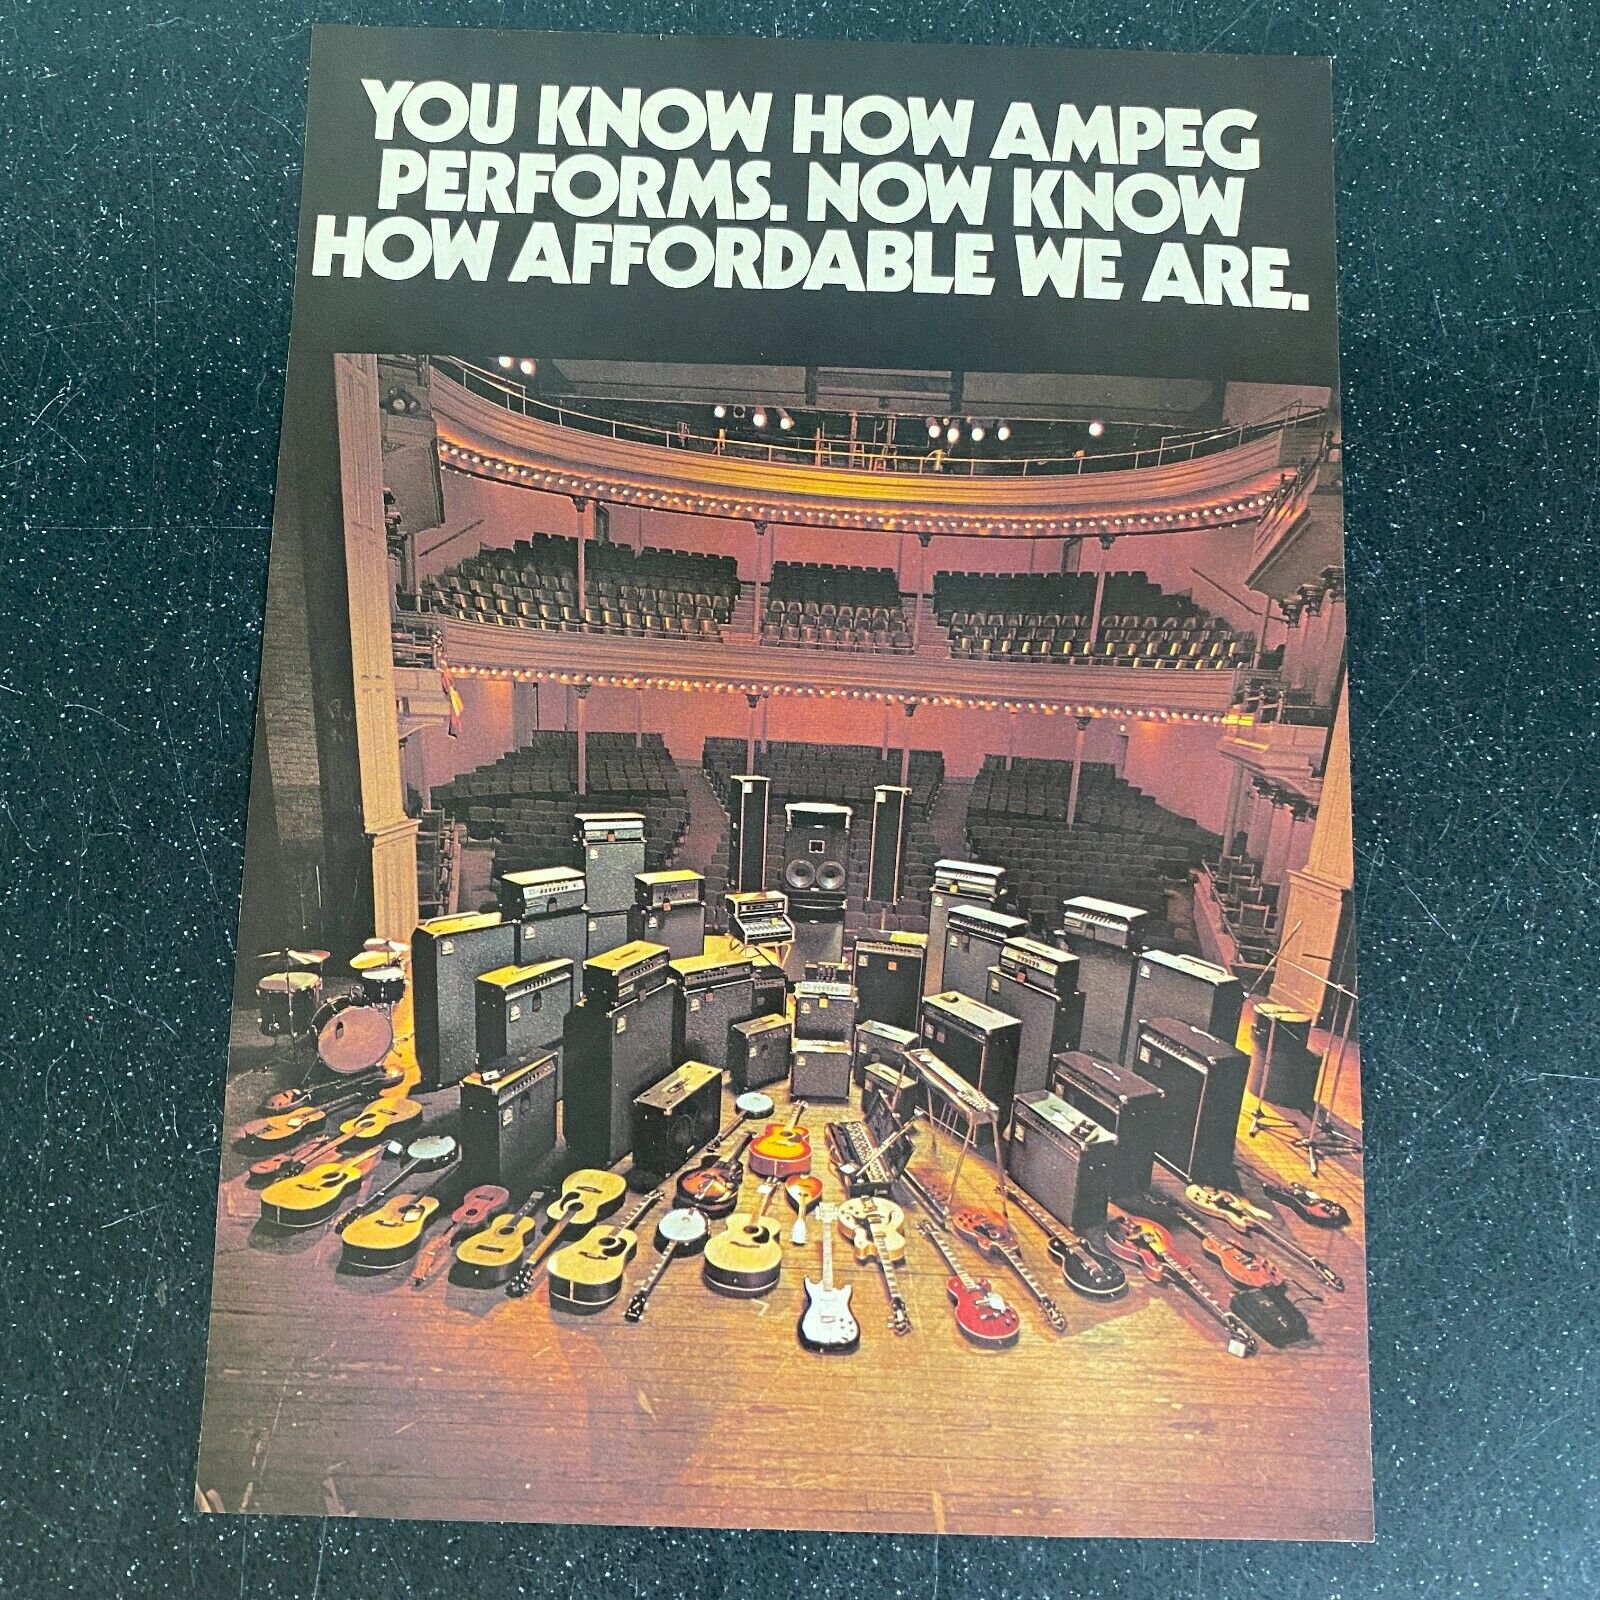 Ampeg Amps Amplifiers Drums Guitars Elkhart IN Vintage Magazine Print Ad